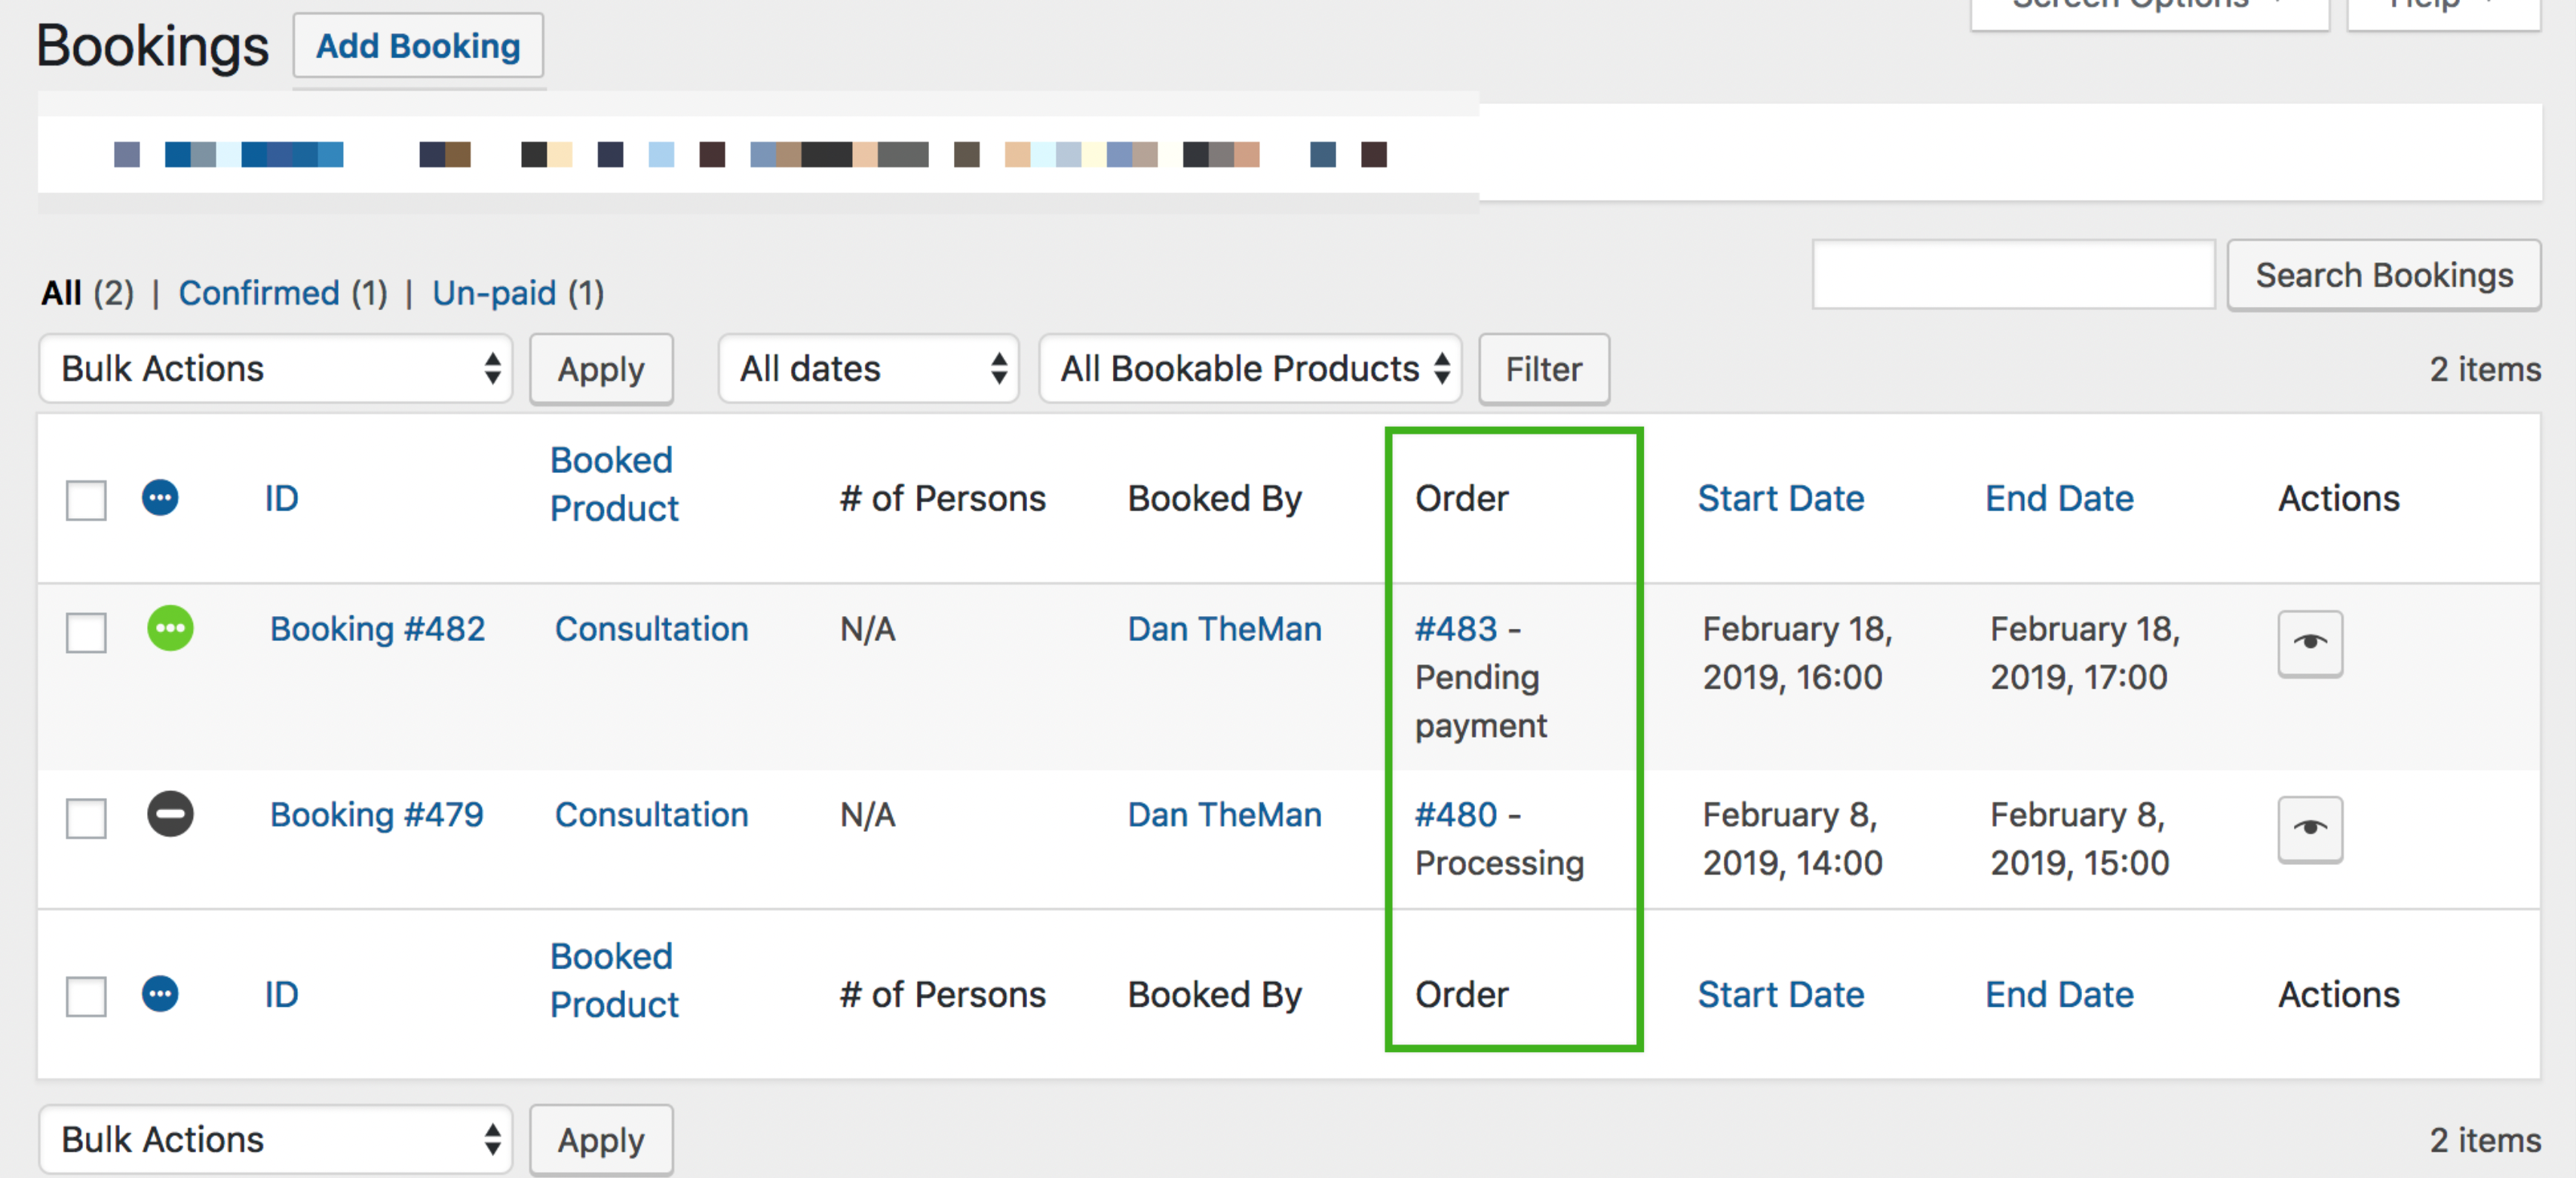 WooCommerce Bookings and WooCommerce Orders Linked on Bookings List Page